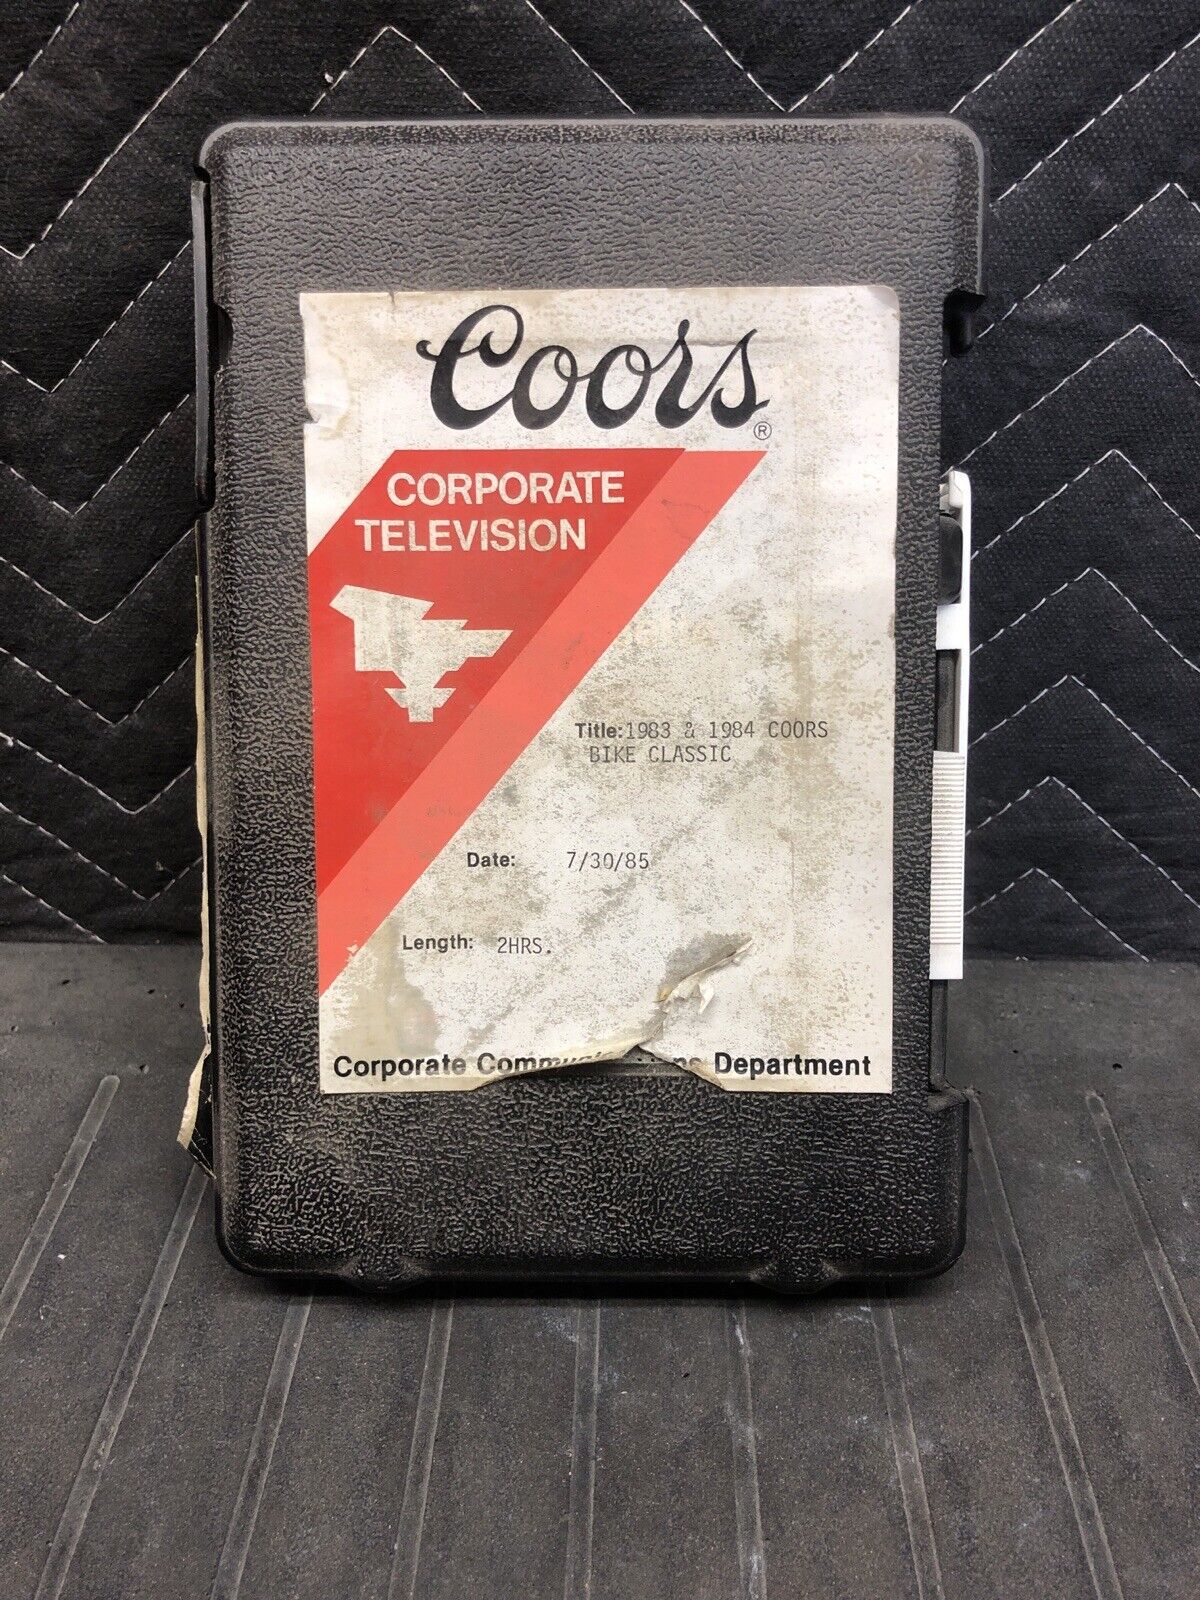 Coors International Bicycle Classic 1983/1984 Corprate Television VHS